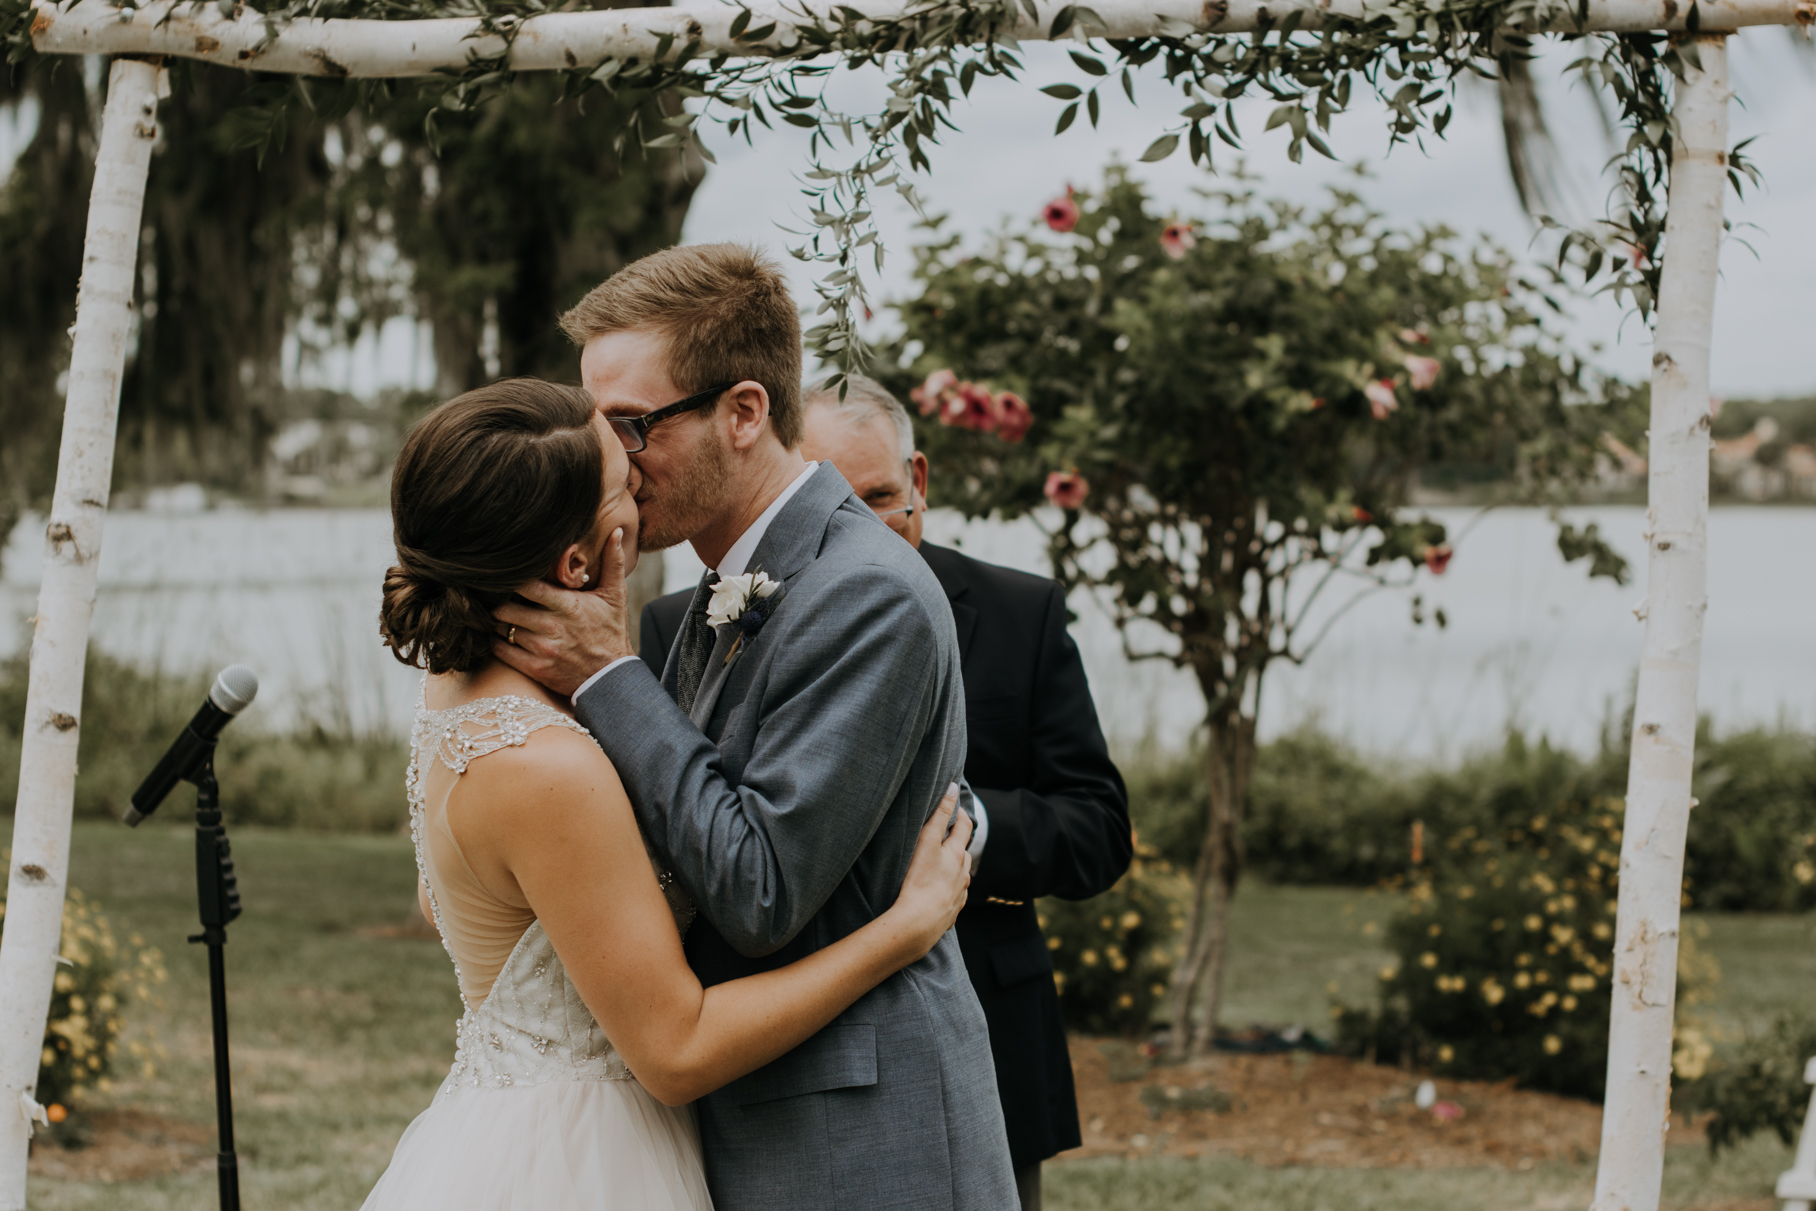 freehearted film co | tampa wedding photo and film | winter park wedding